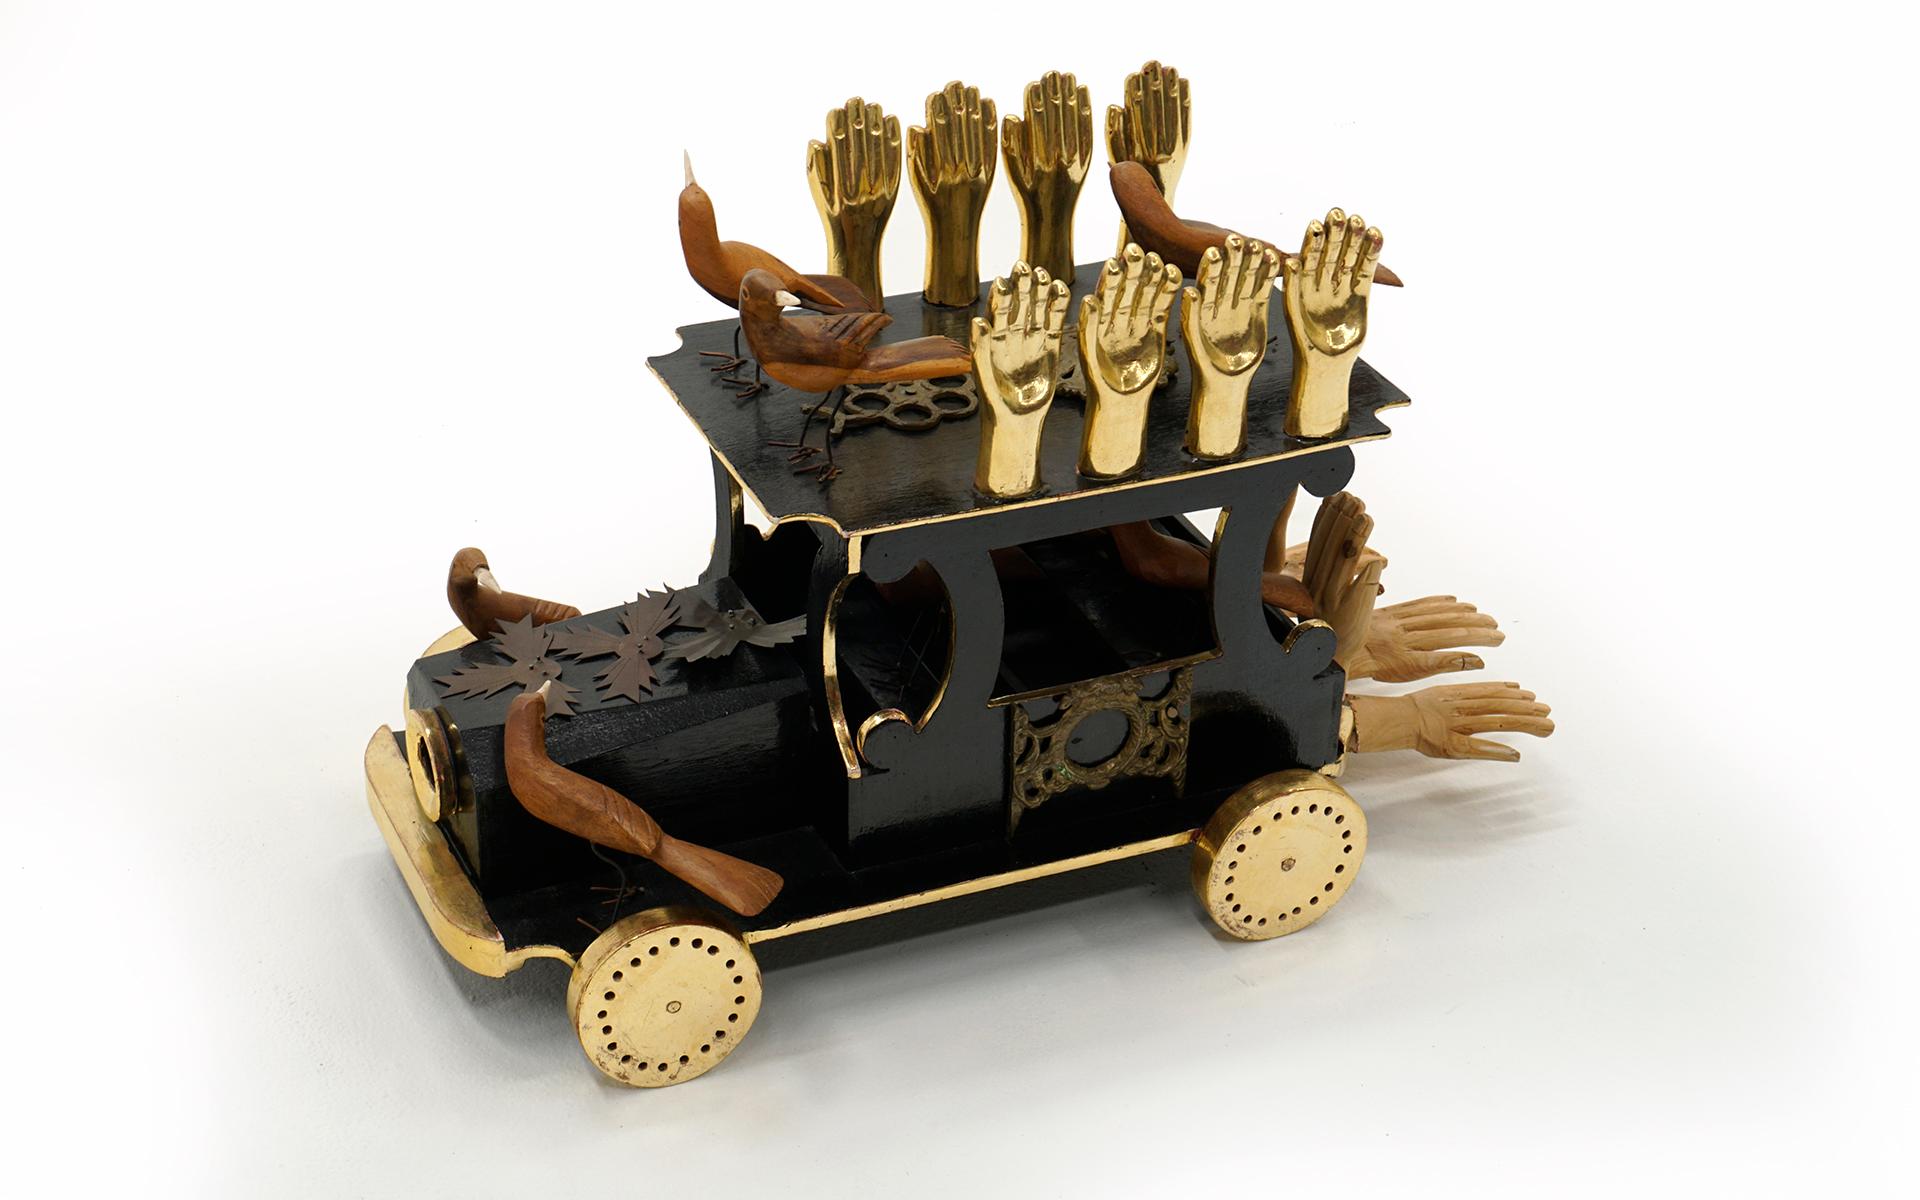 Surrealist sculpture by Mexican artist Pedro Friedeberg.  This piece was created in 1978 featuring carved and gold leaf hands, carved walnut birds, carved wood hands, and brass elements attached to the lacquered wood truck with moving wheels.  A